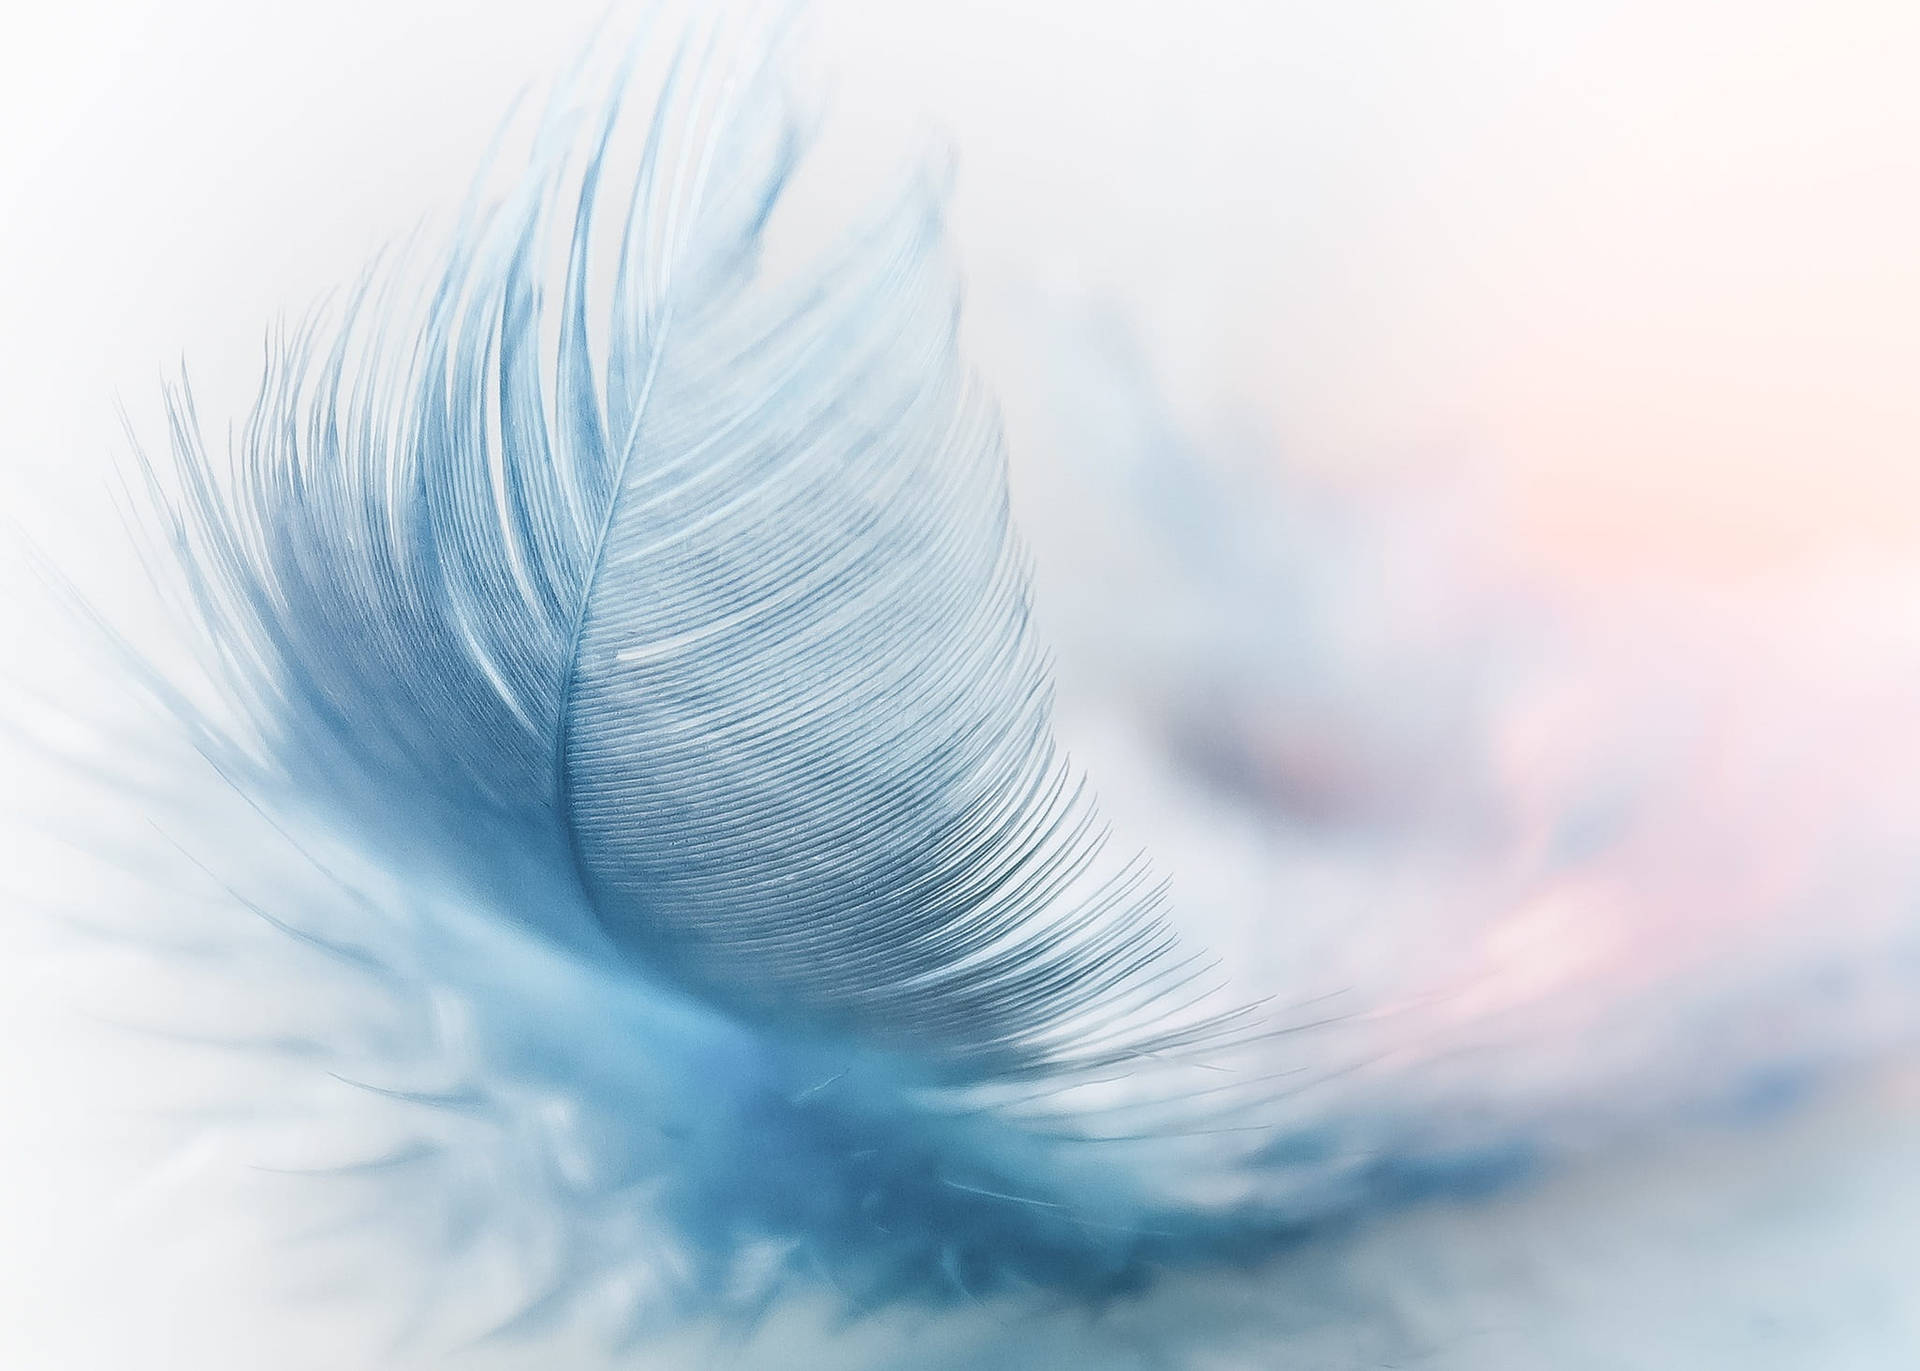 A close up of a feather in blue and white - Feathers